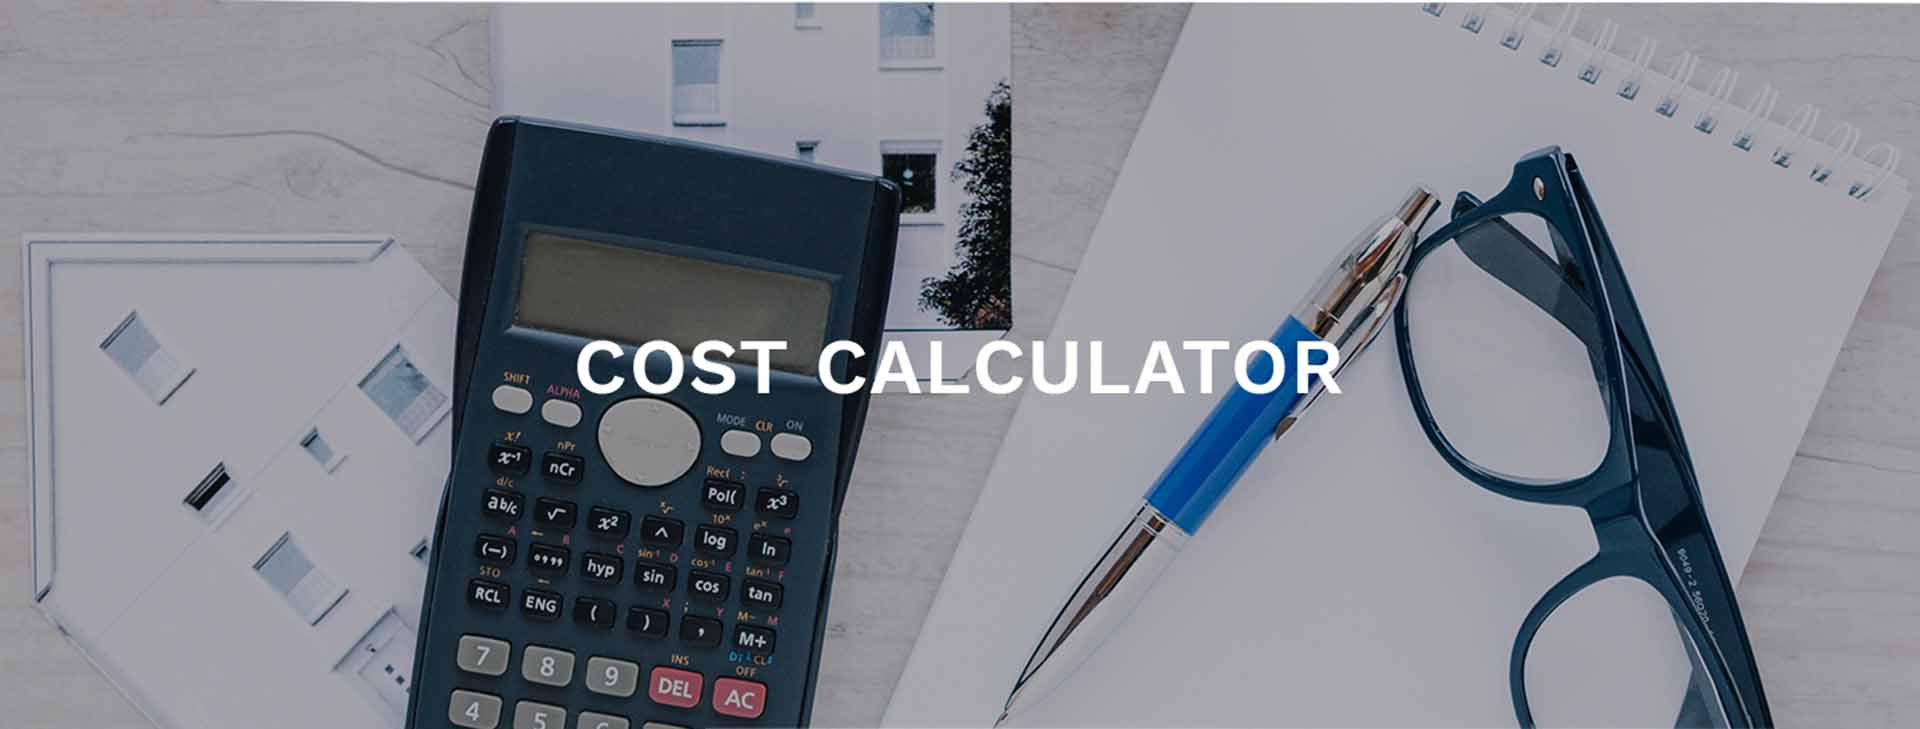 Mp Birla Cement Calculator - The Best Way To Calculate Cost Of Cement